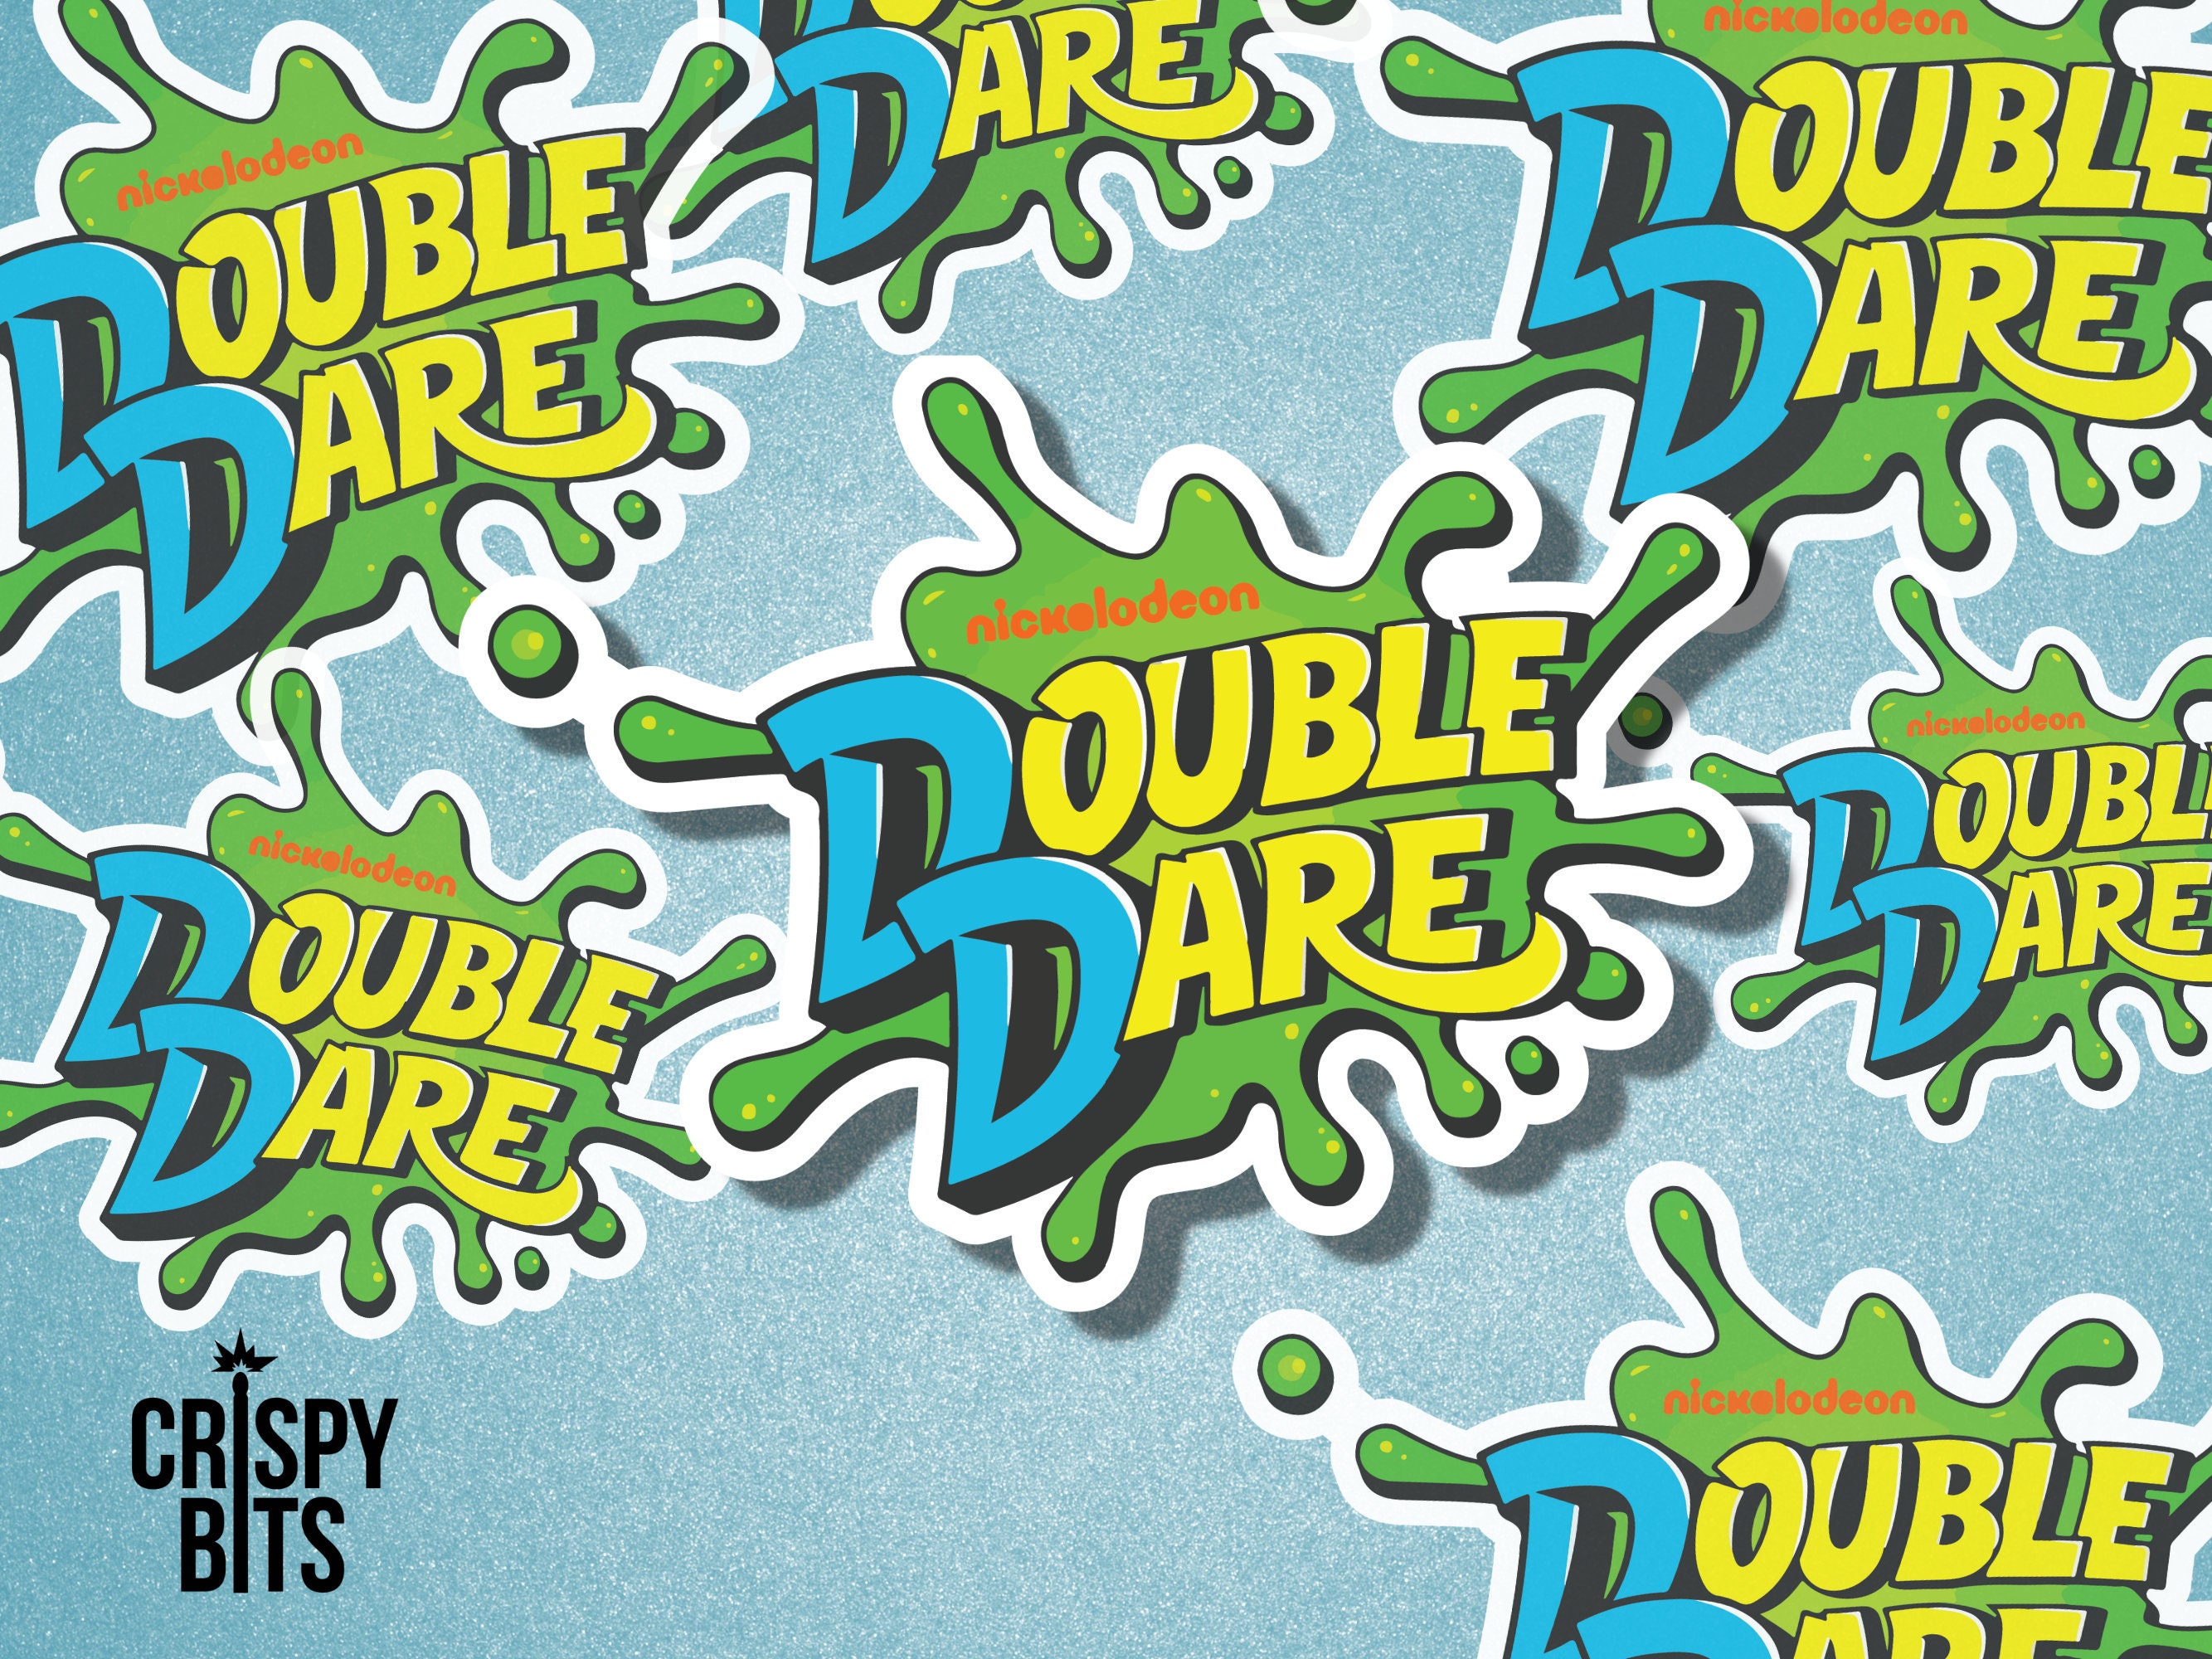 How to Make a Double Dare Cake - Nickelodeon-Inspired Slime Cake